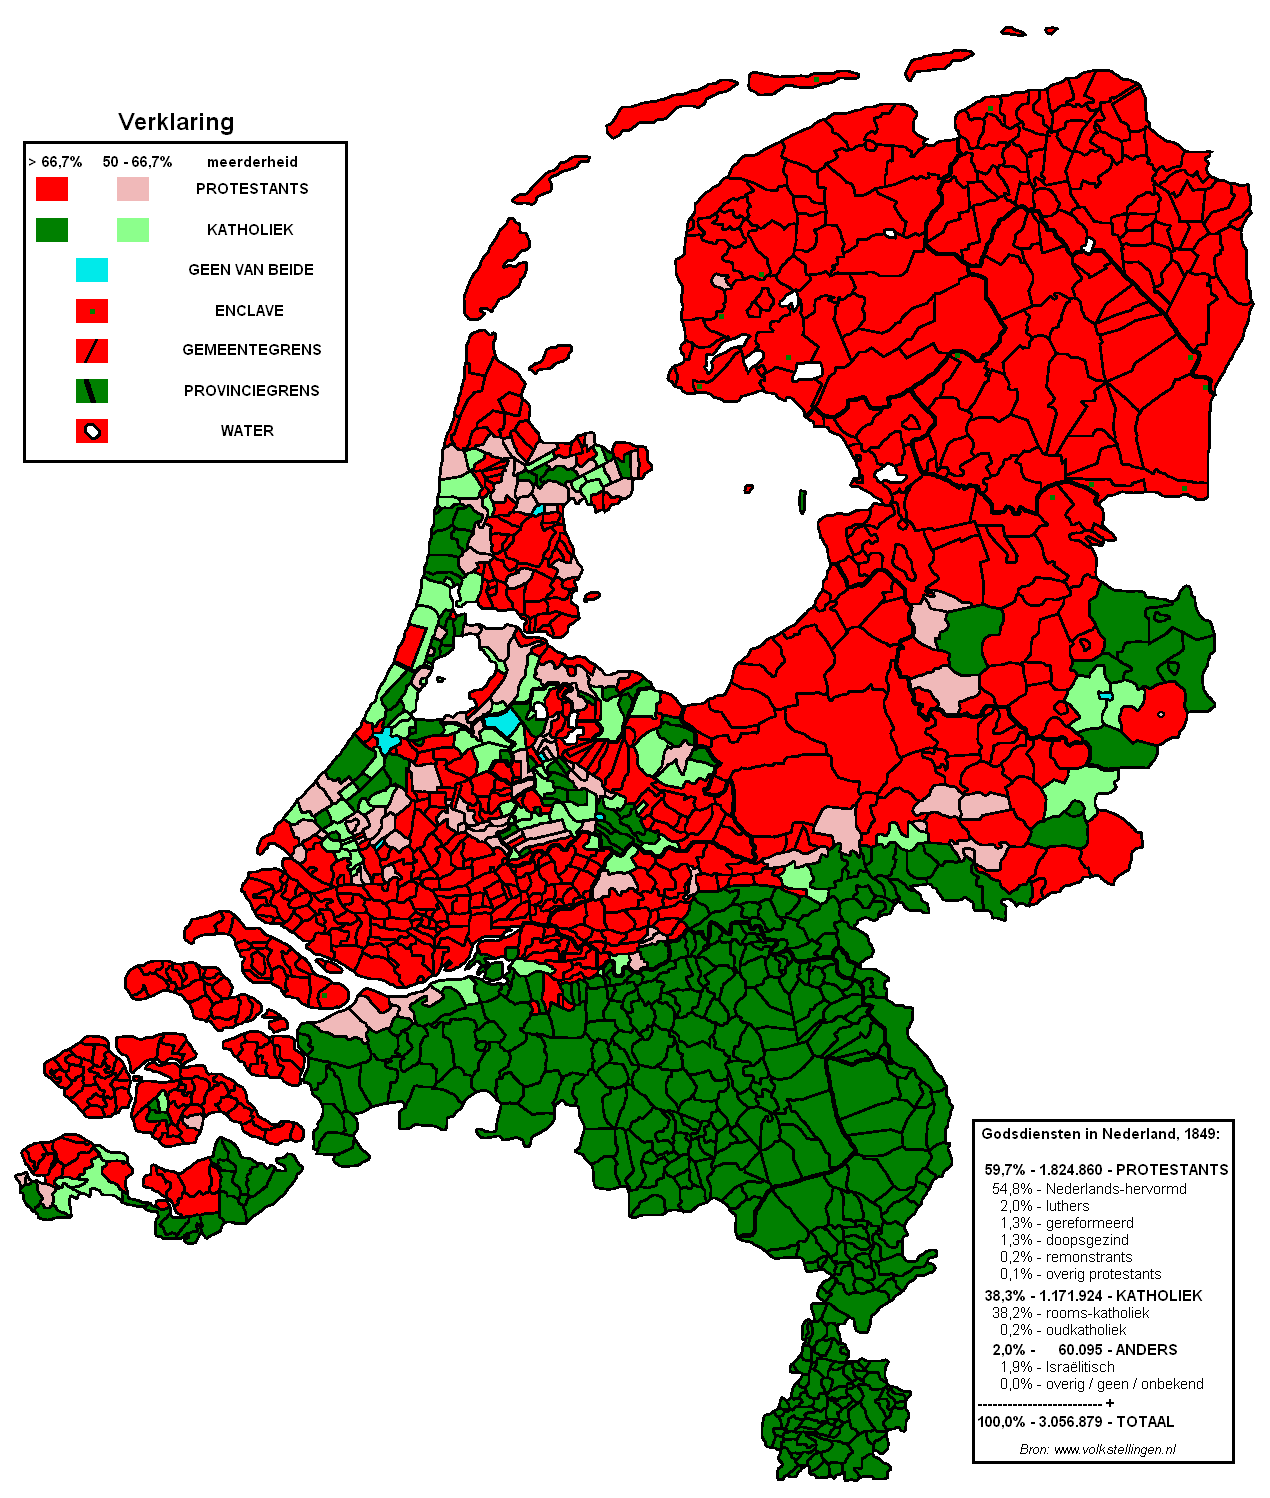 Religious map of the Netherlands